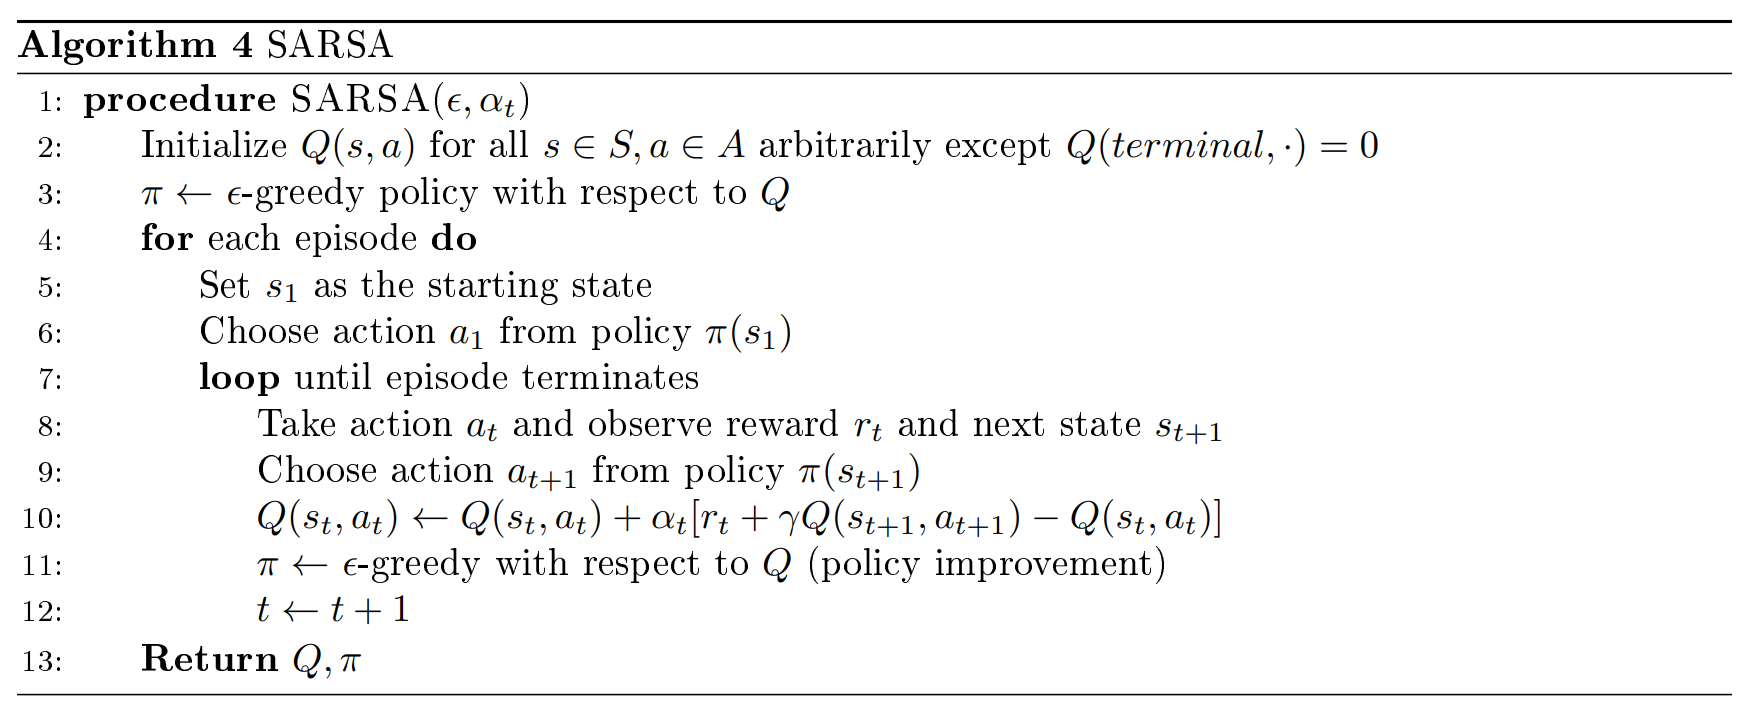 docs/stanford-cs234-notes-zh/img/fig4_alg_4.png